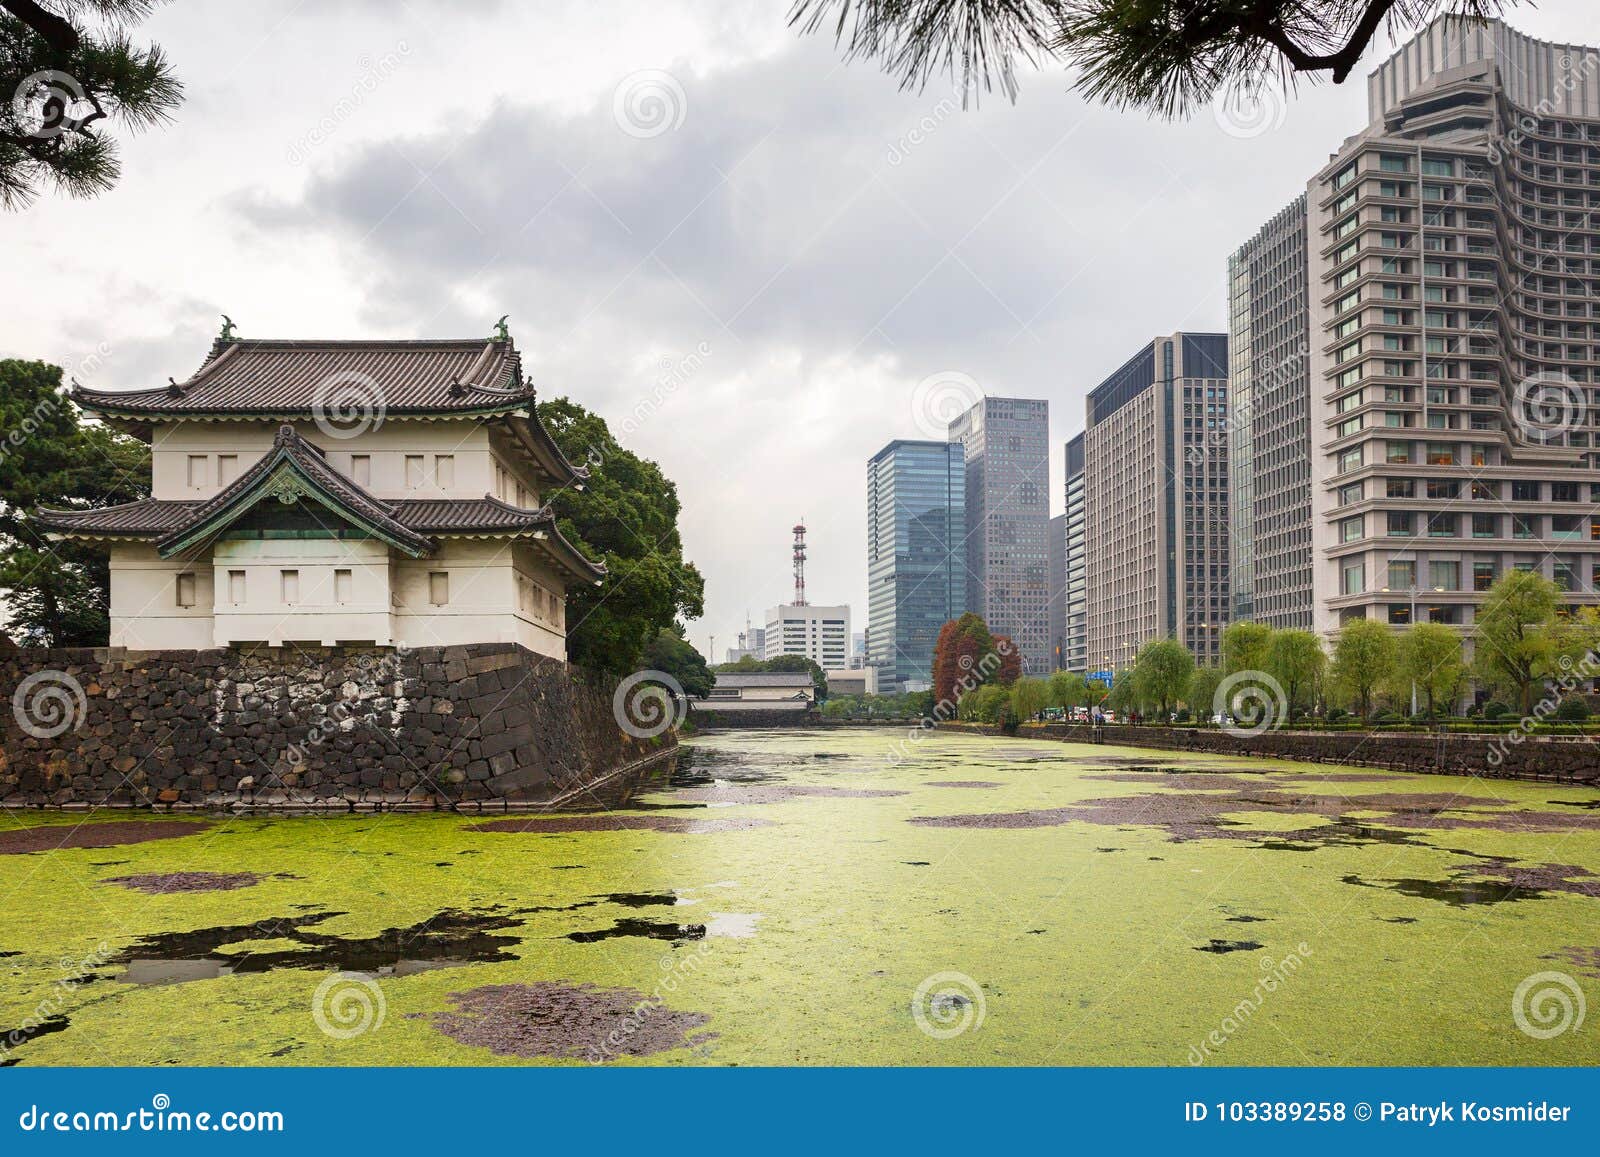 cityscape of tokio at the imperial palace